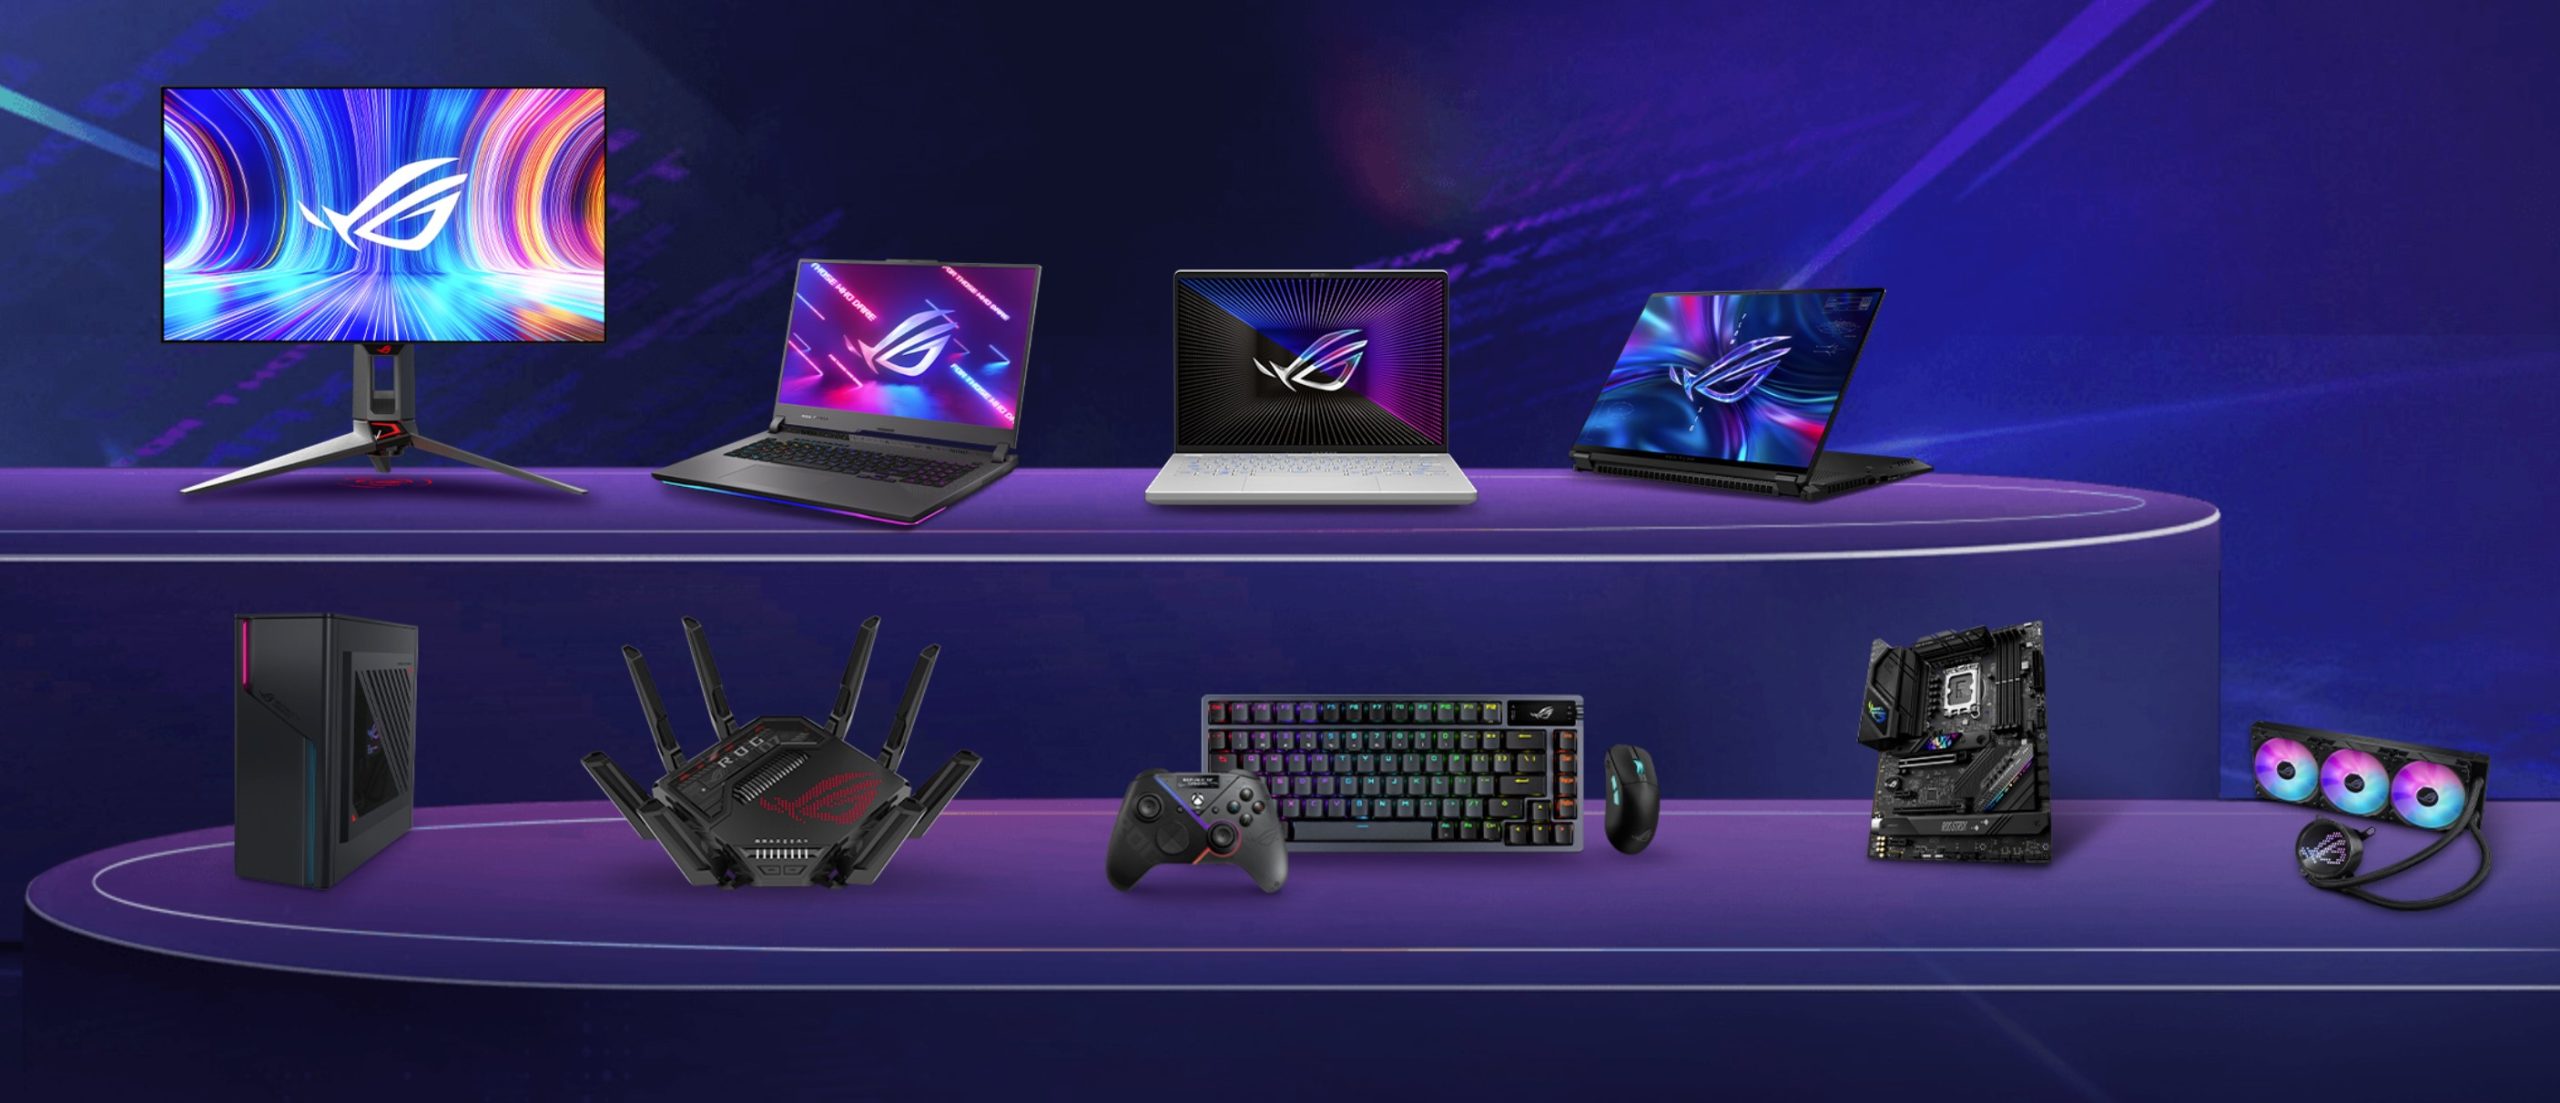 ROG at CES 2023 (ASUS Republic of Gamers)